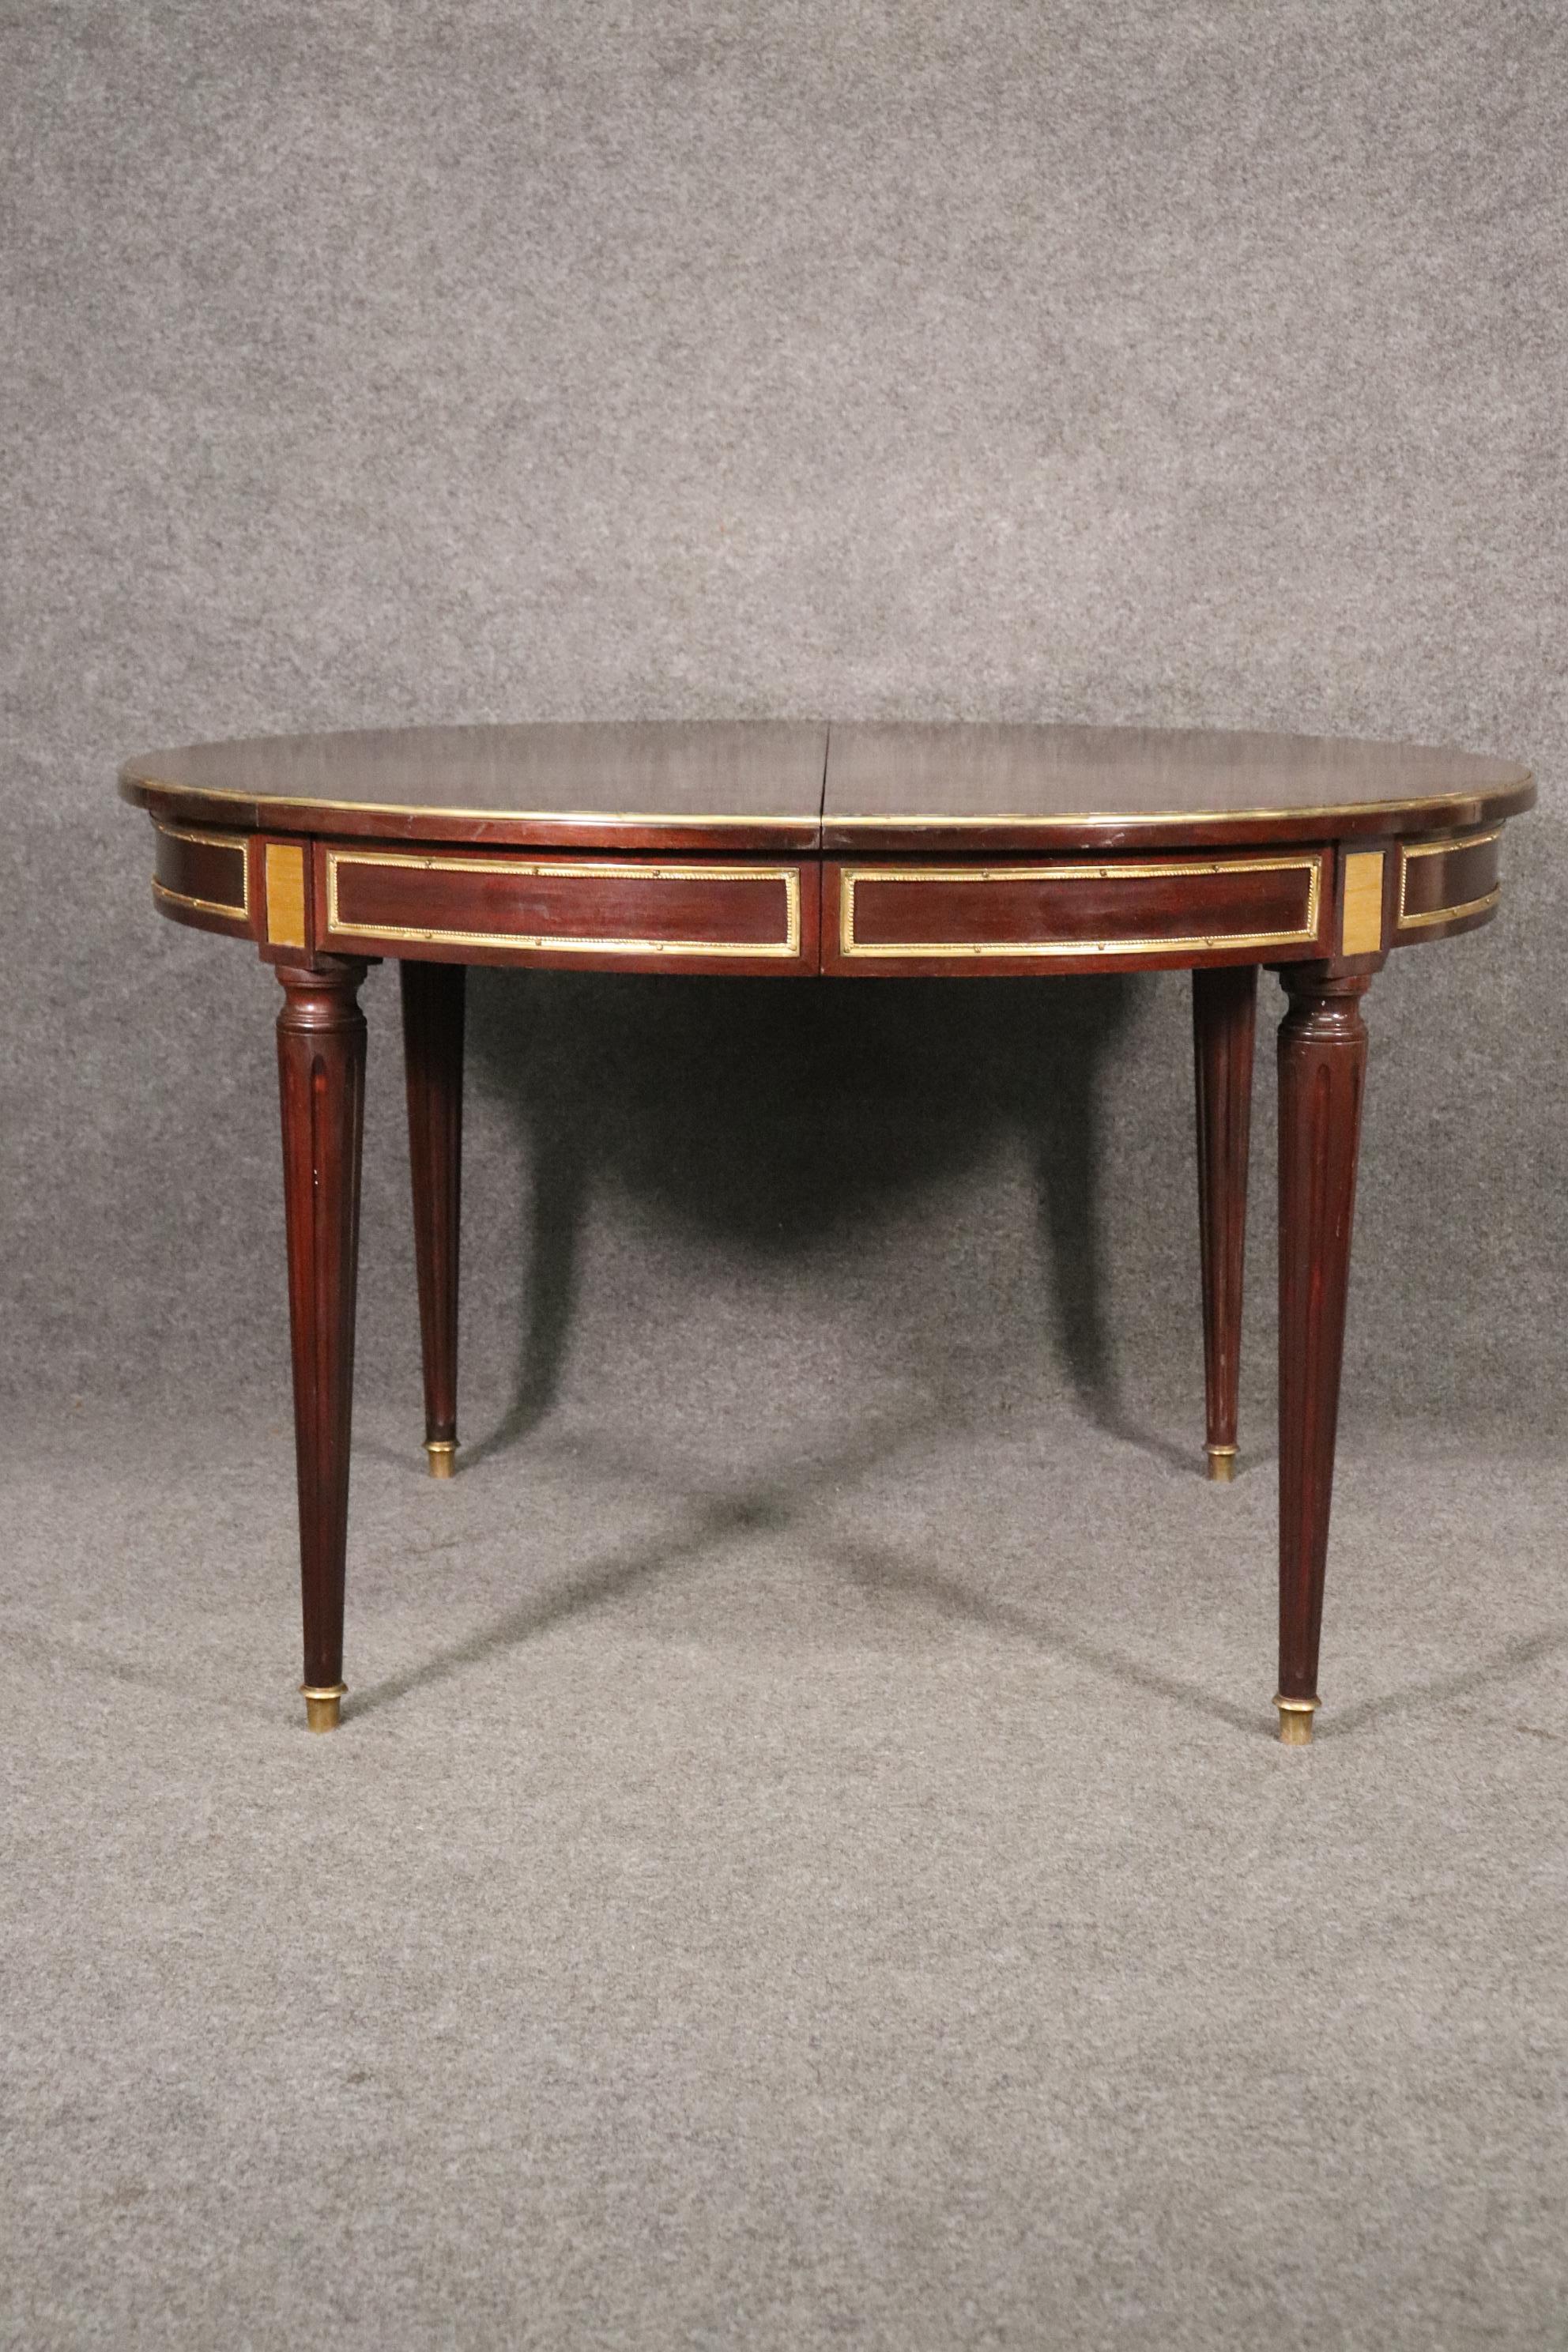 Round Signed Maison Jansen Brass Mounted Mahogany Louis XVI Dining Table w Leaf In Good Condition In Swedesboro, NJ